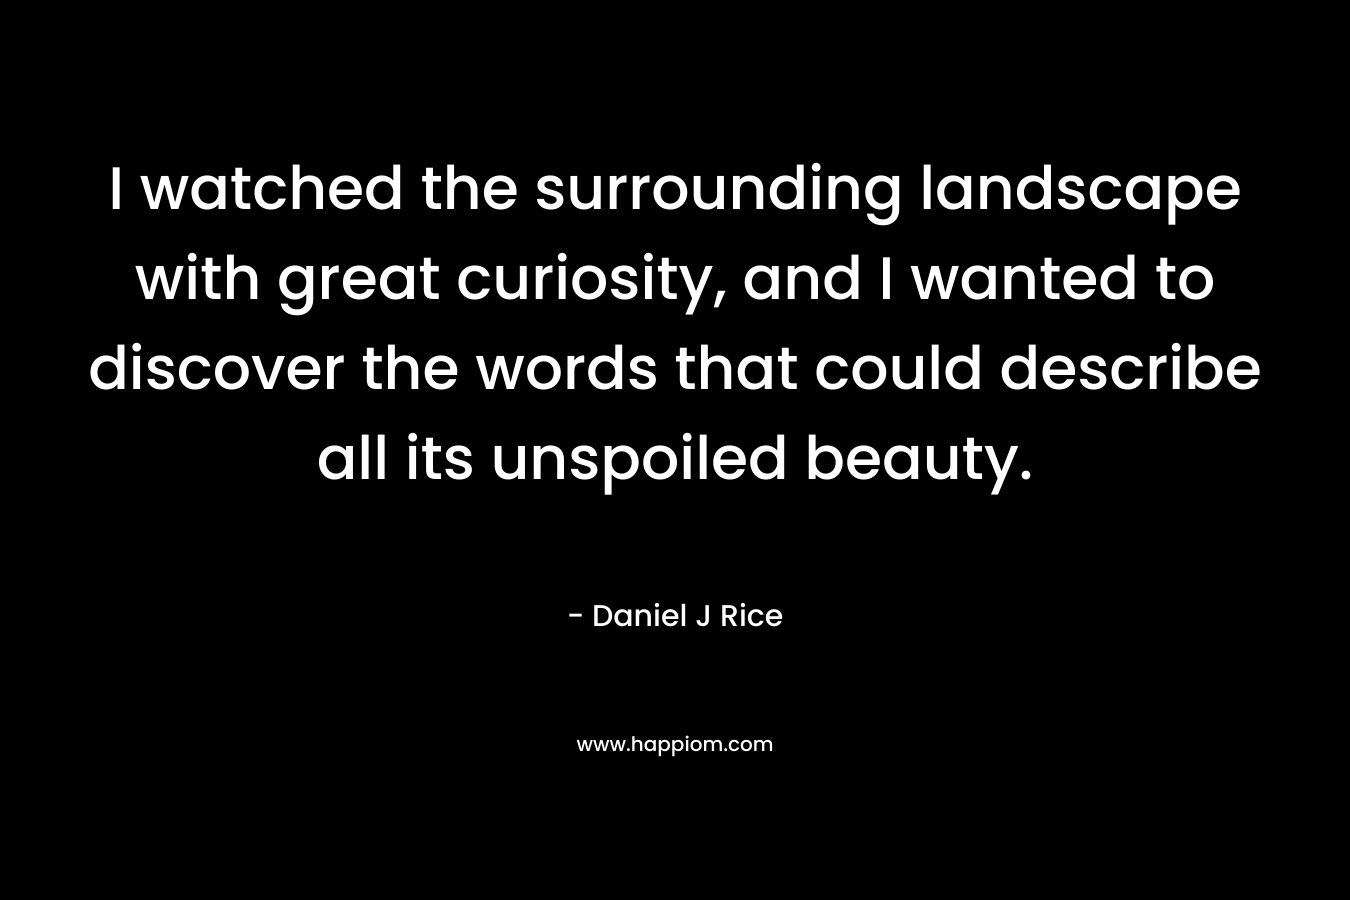 I watched the surrounding landscape with great curiosity, and I wanted to discover the words that could describe all its unspoiled beauty. – Daniel J Rice